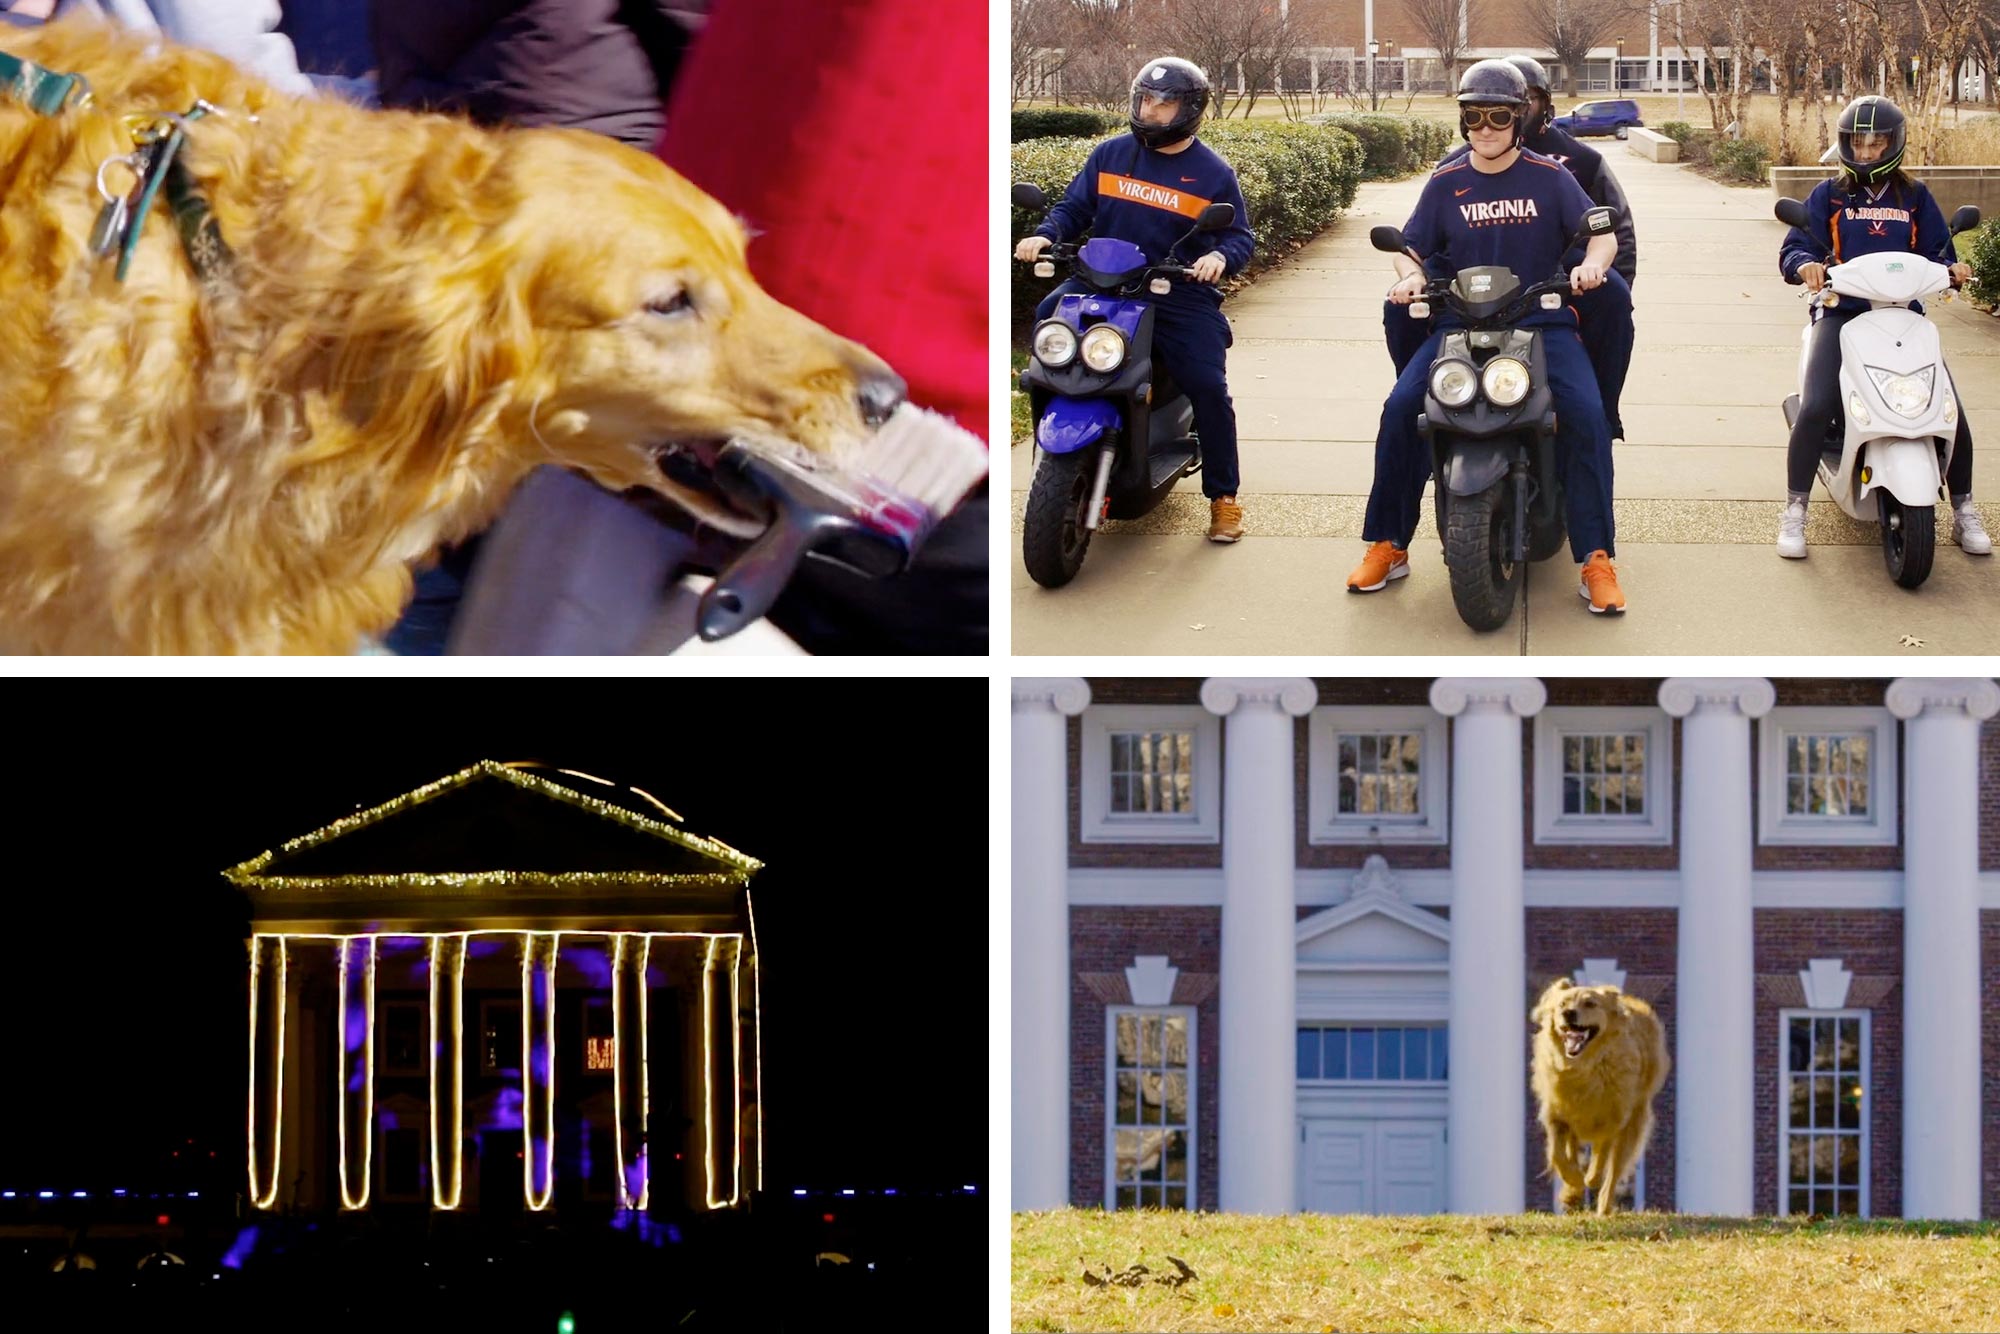 top left: dog carrying paintbrush, top right: students on mopeds, bottom left: Rotunda light up in lights, Bottom right: dog running across the Lawn